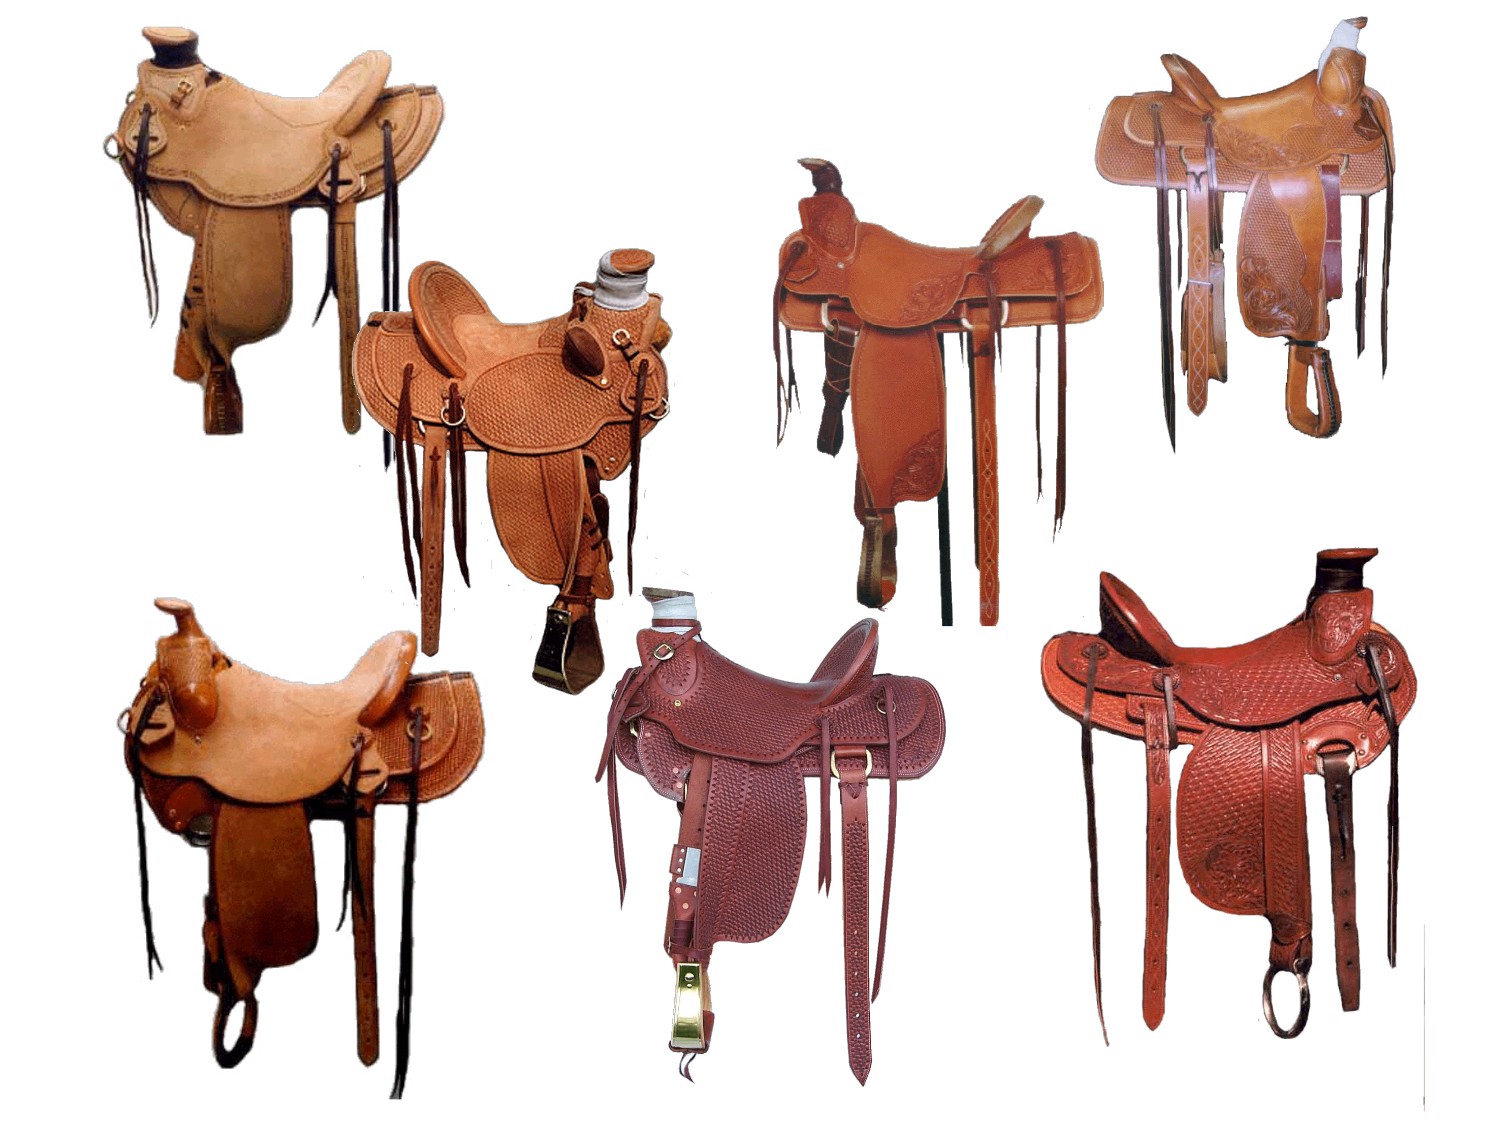 Just a few examples of the many types of saddles